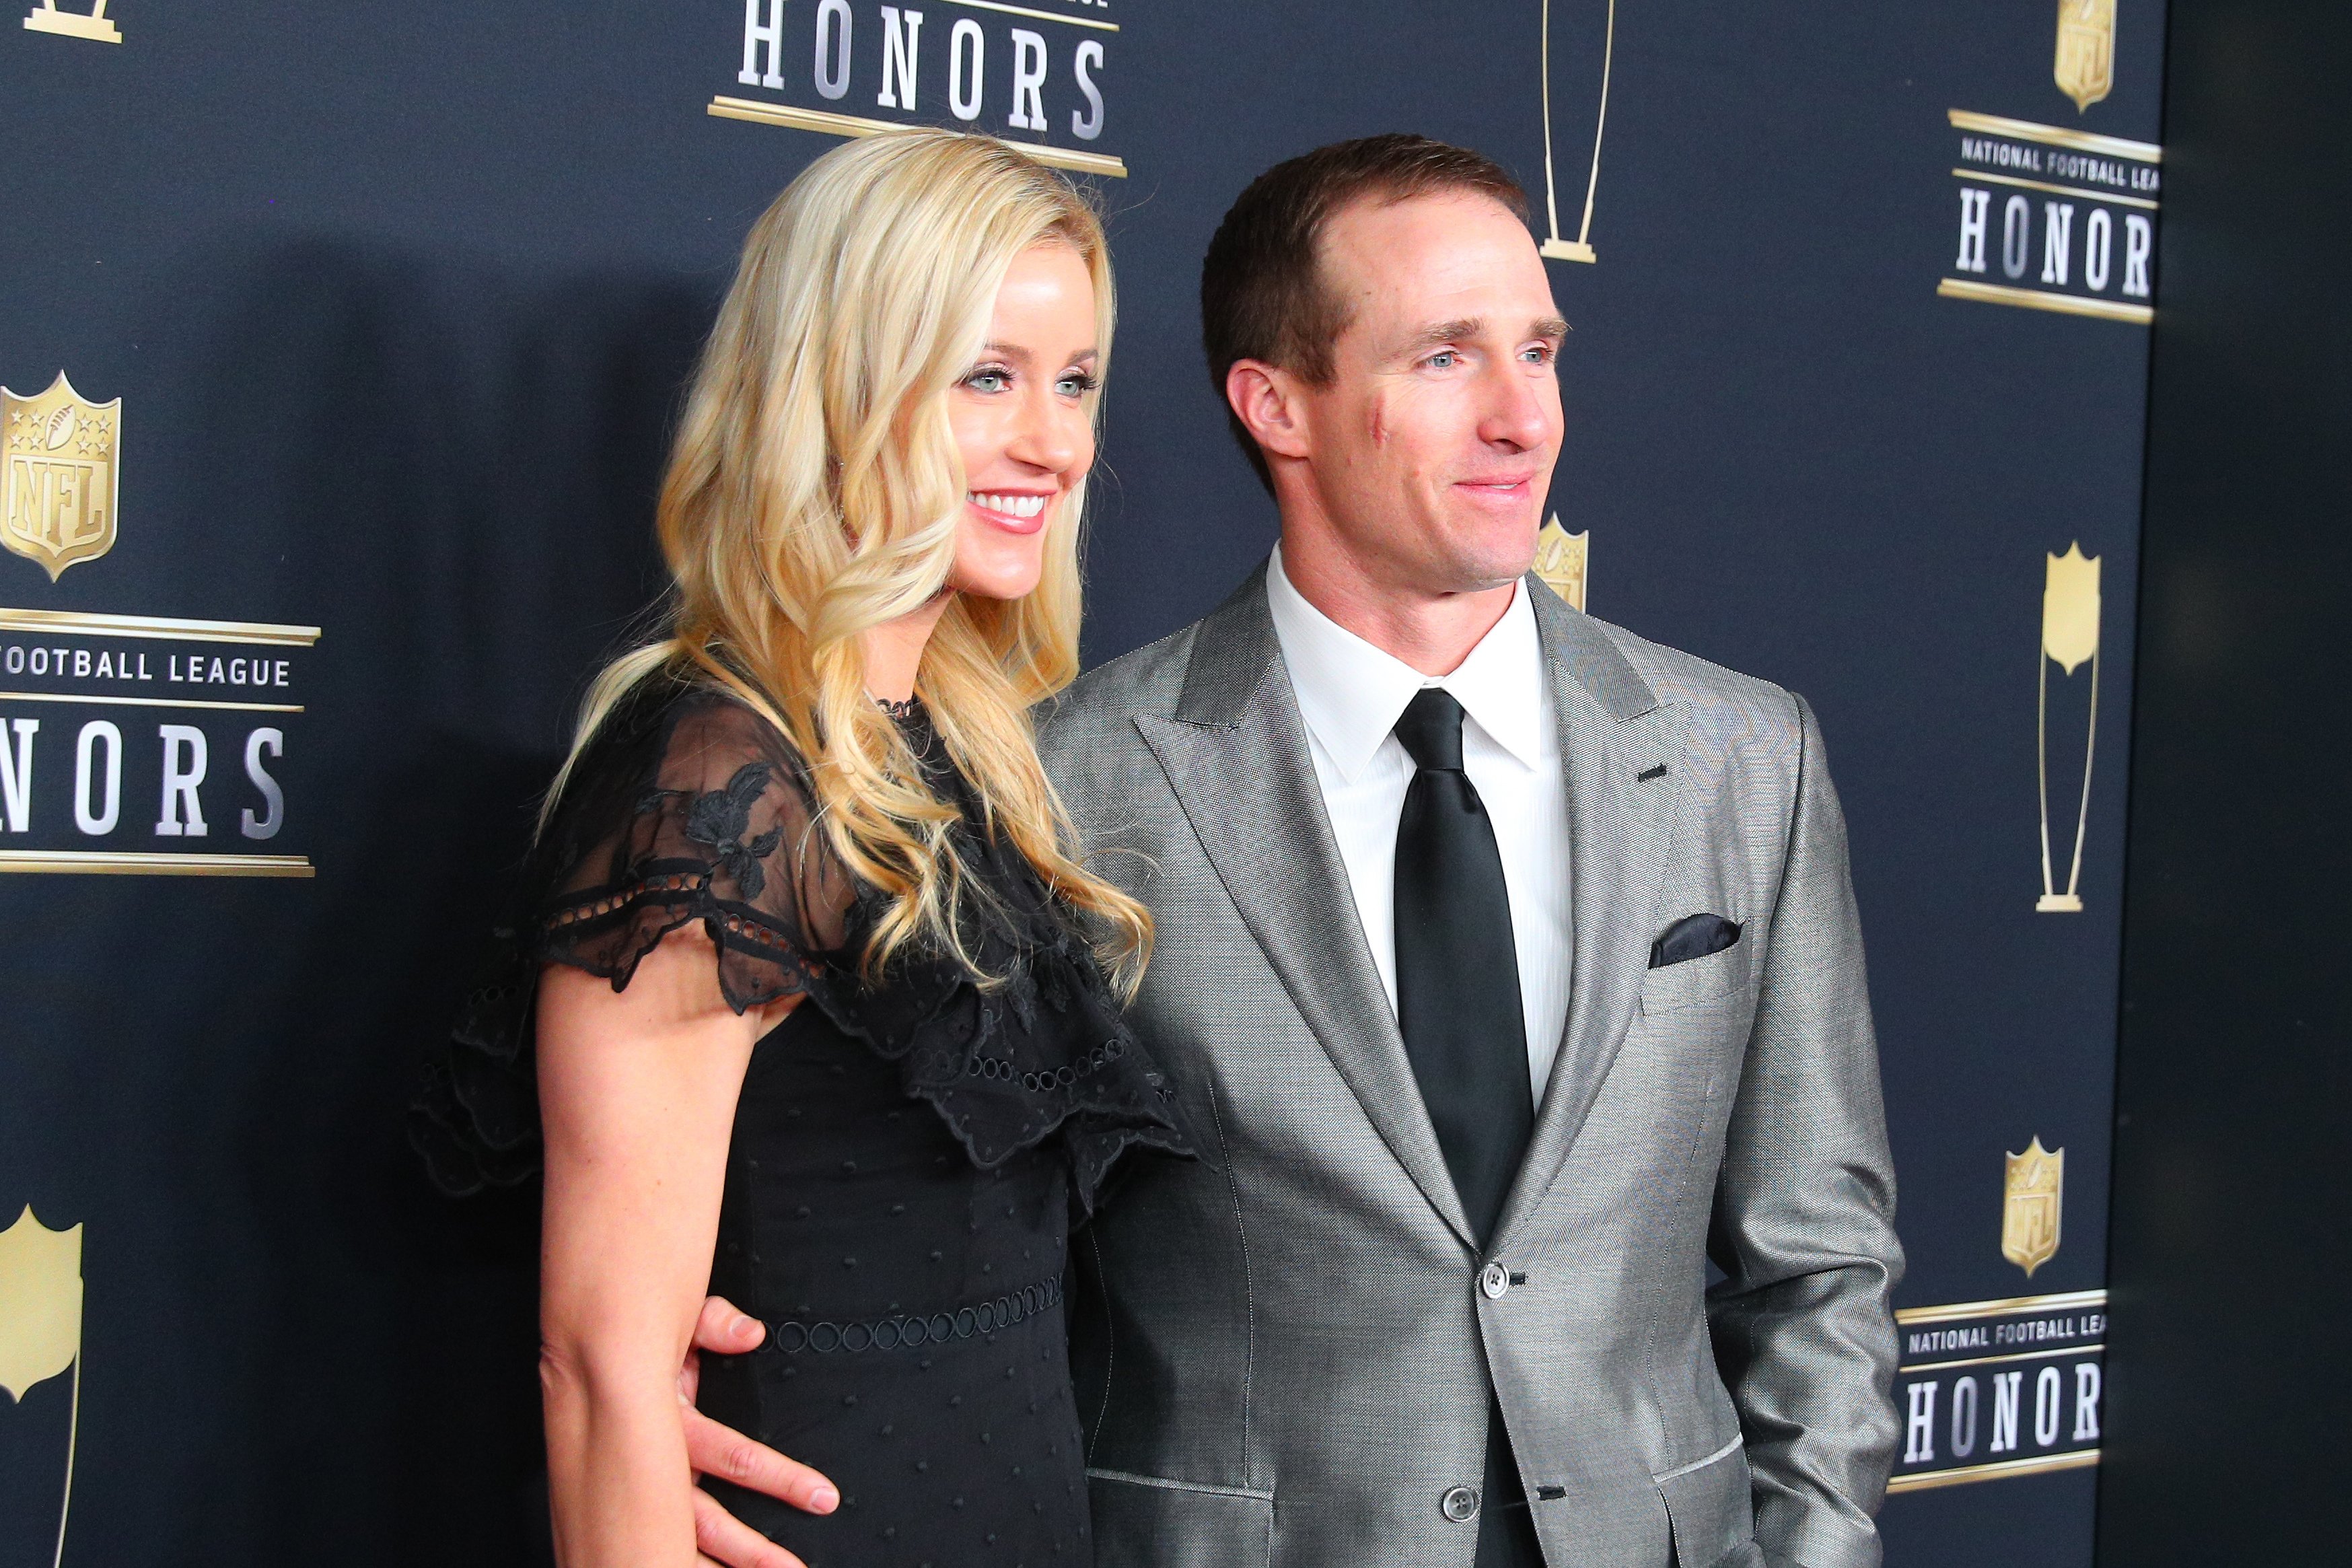 Drew Brees and his wife Brittany pose for photographs on the Red Carpet at NFL Honors during Super Bowl LII week on February 3, 2018, at Northrop at the University of Minnesota in Minneapolis, MN. | Source: Getty Image